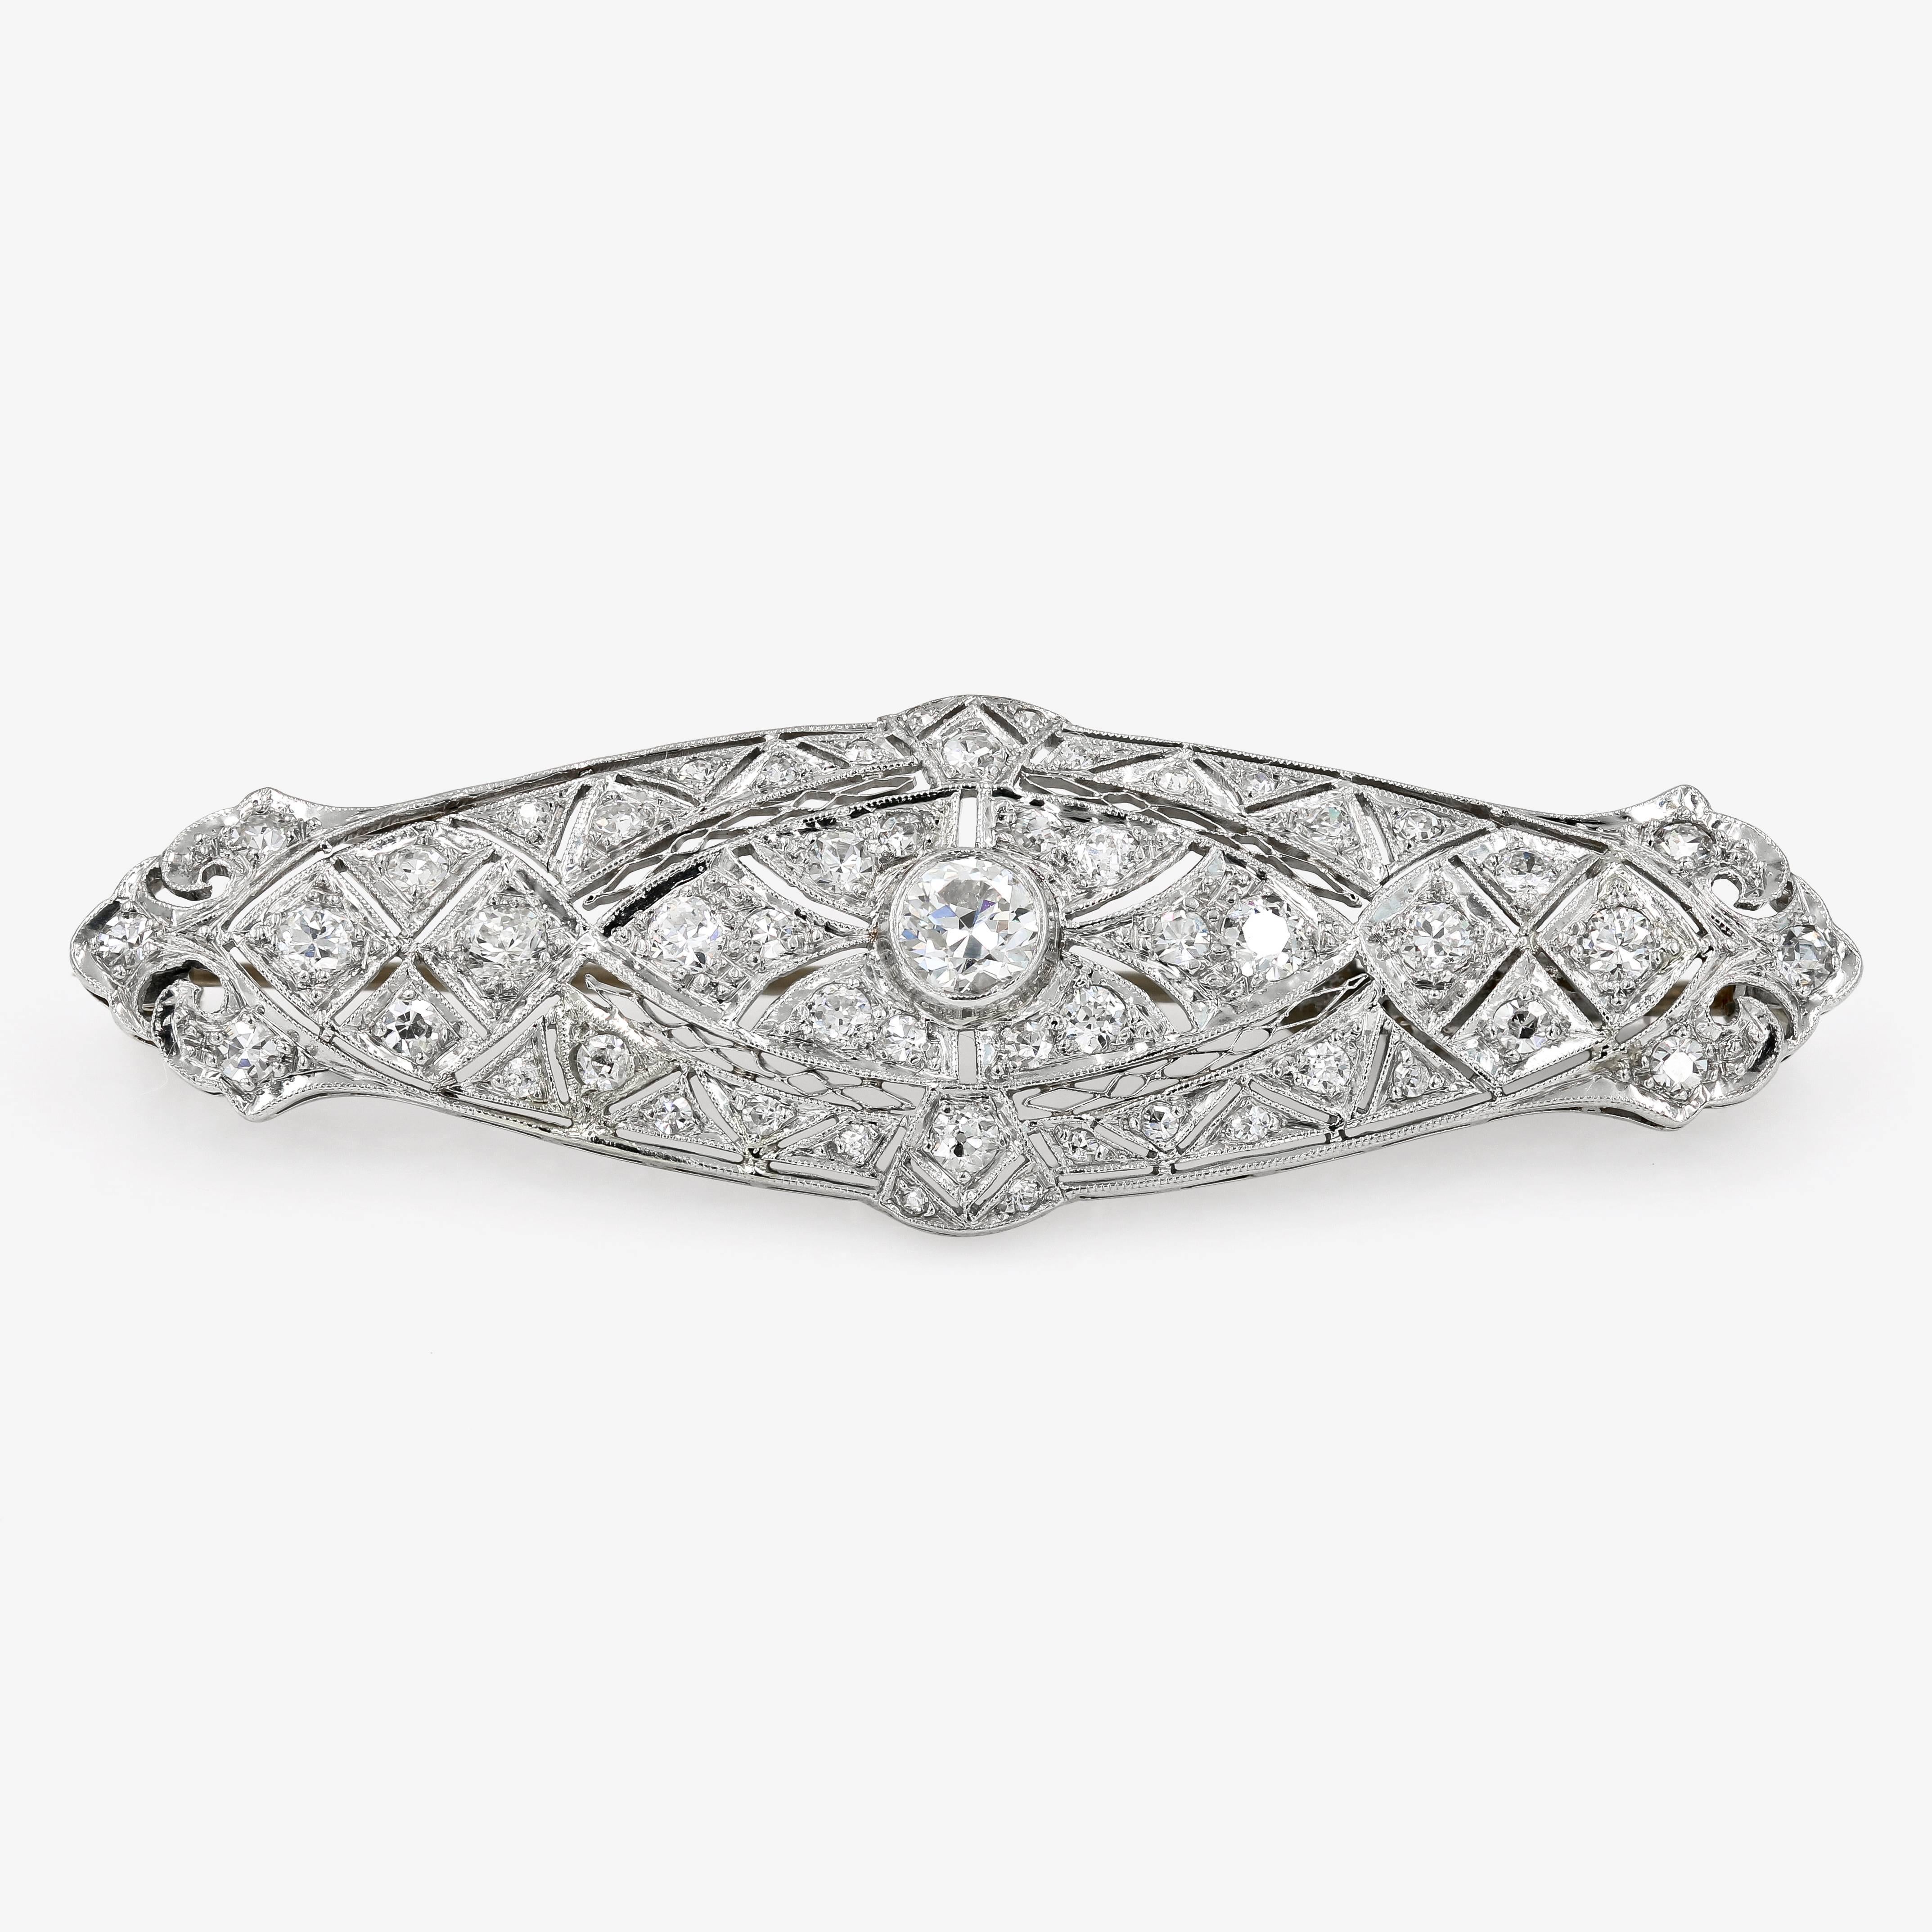 This unique Art Deco estate pin in platinum is set with one round center diamond= .33ct. and  50 round diamonds=.77ct. t.w. for a total diamond weight of 1.10cts. t.w. The diamonds are H in color and range from SI1-VS2 in clarity.

Every Lester